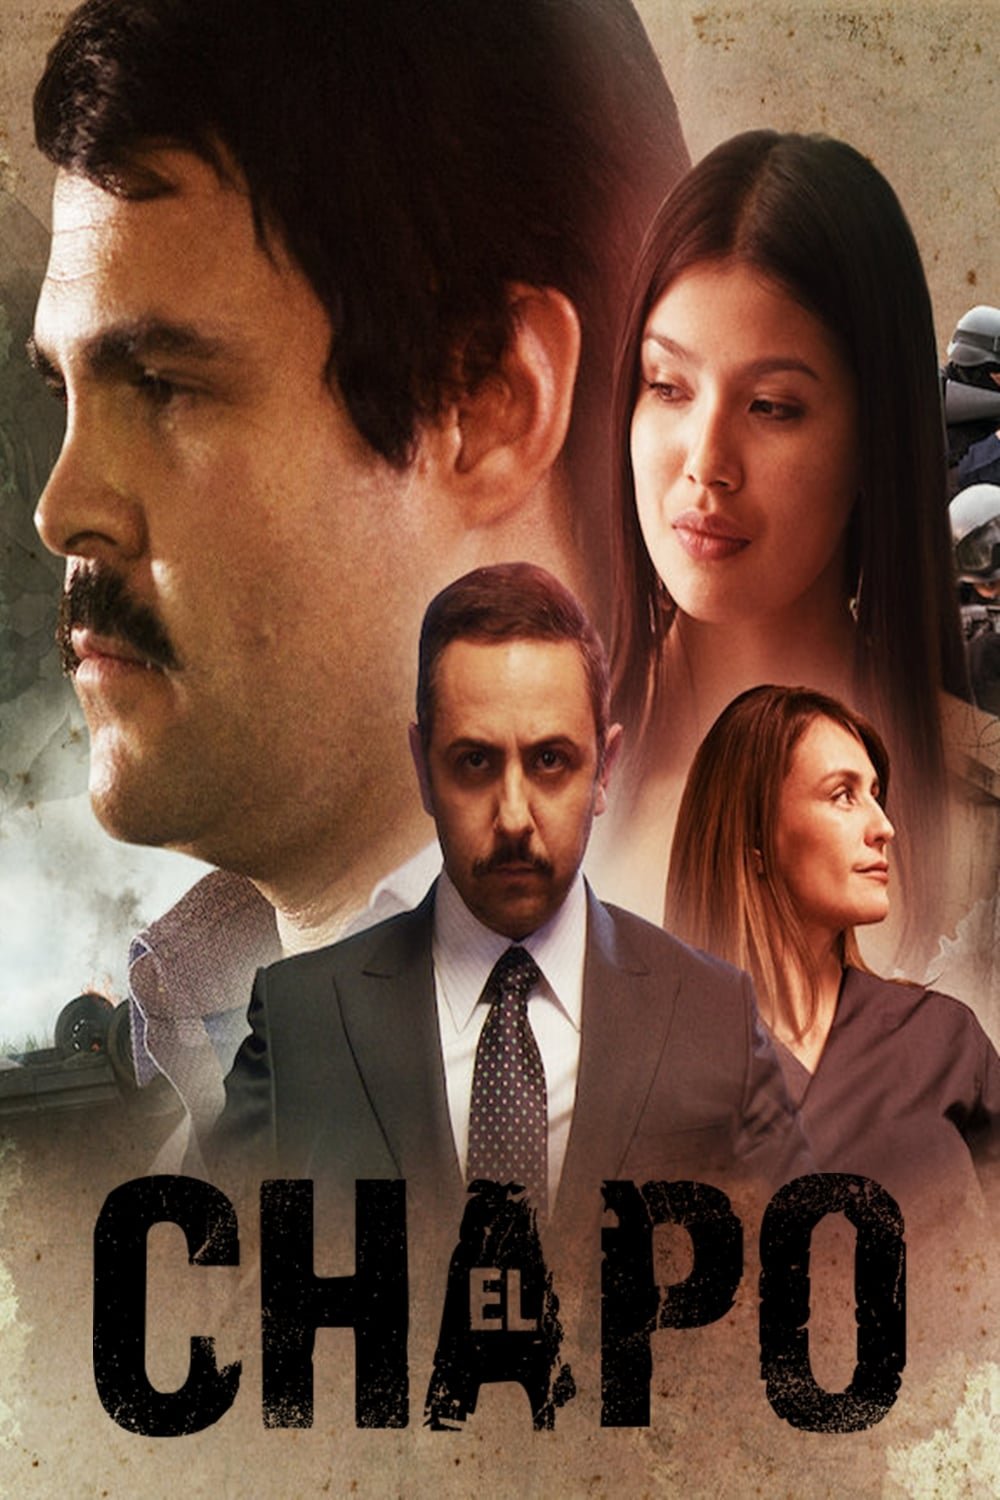 Juan Pablo Gamboa movies and shows, where to watch online and